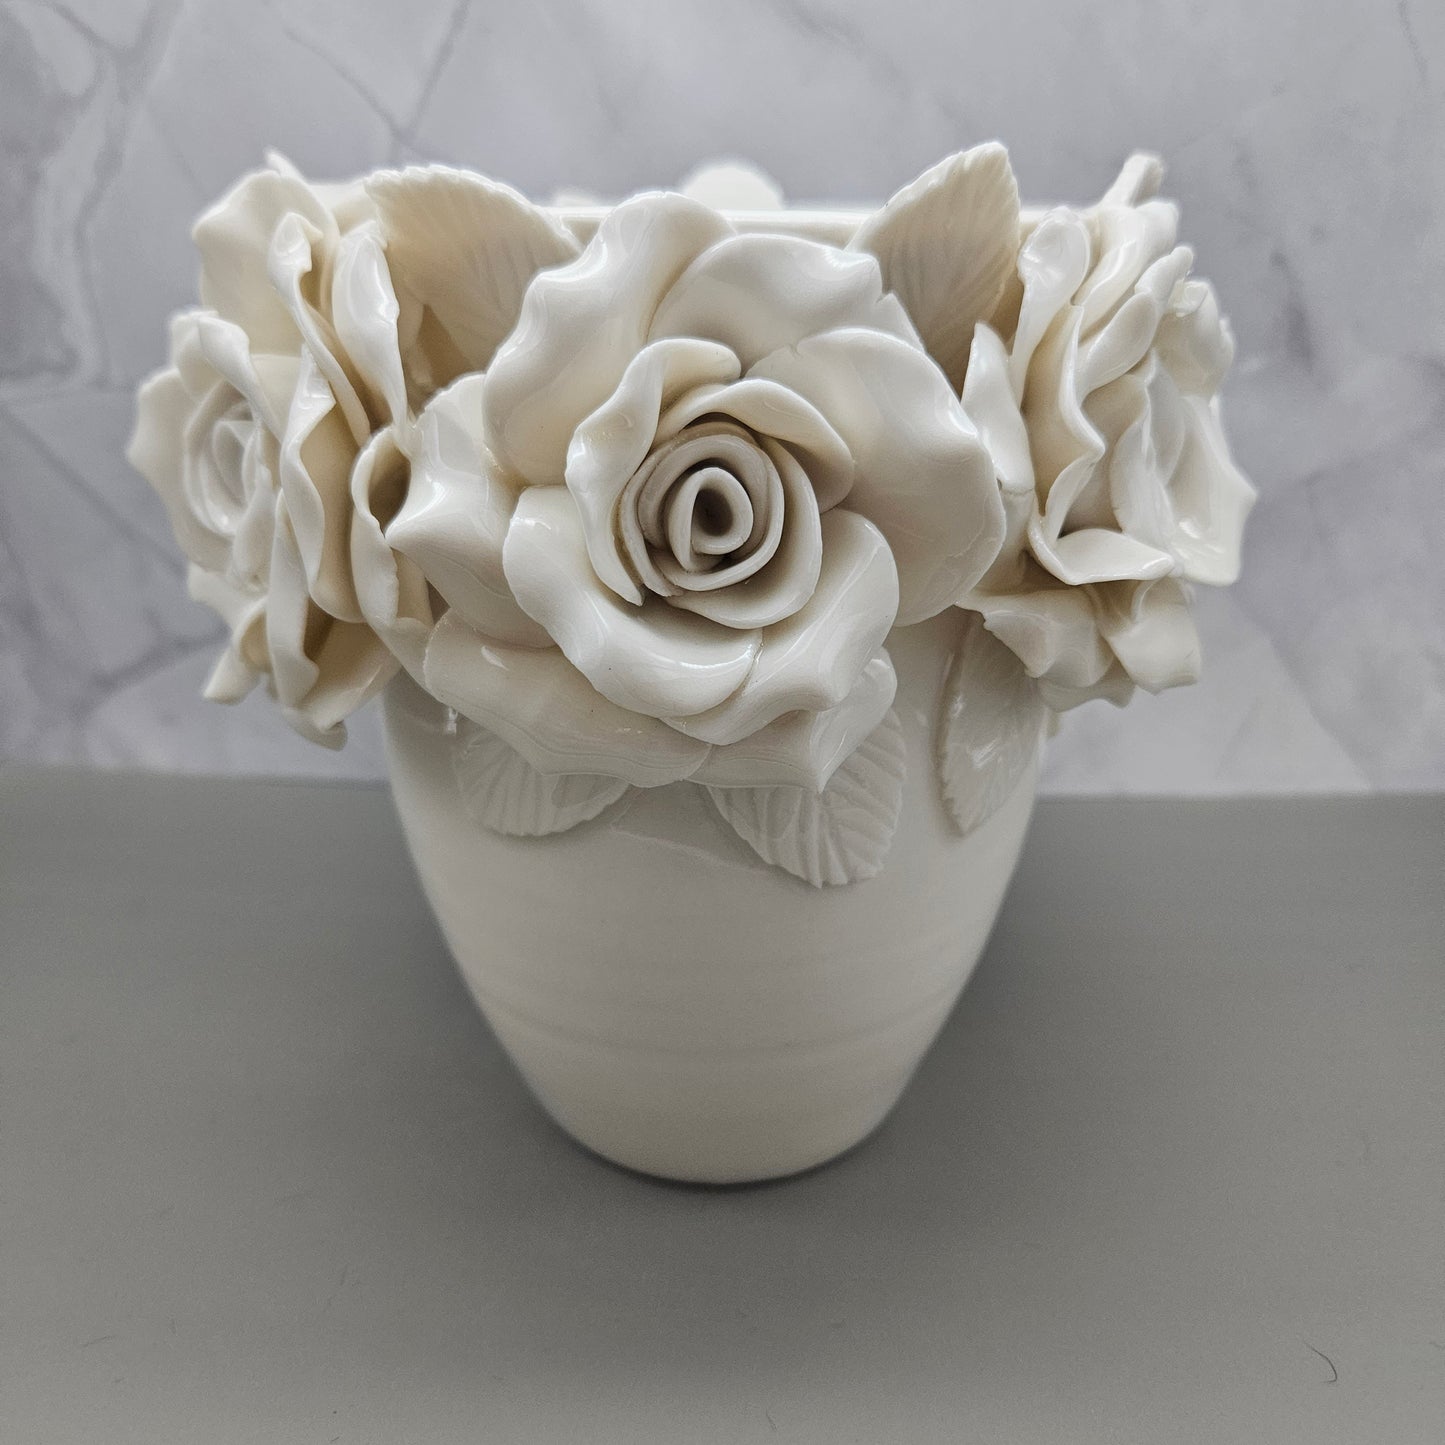 White frost 8 inch vases with roses